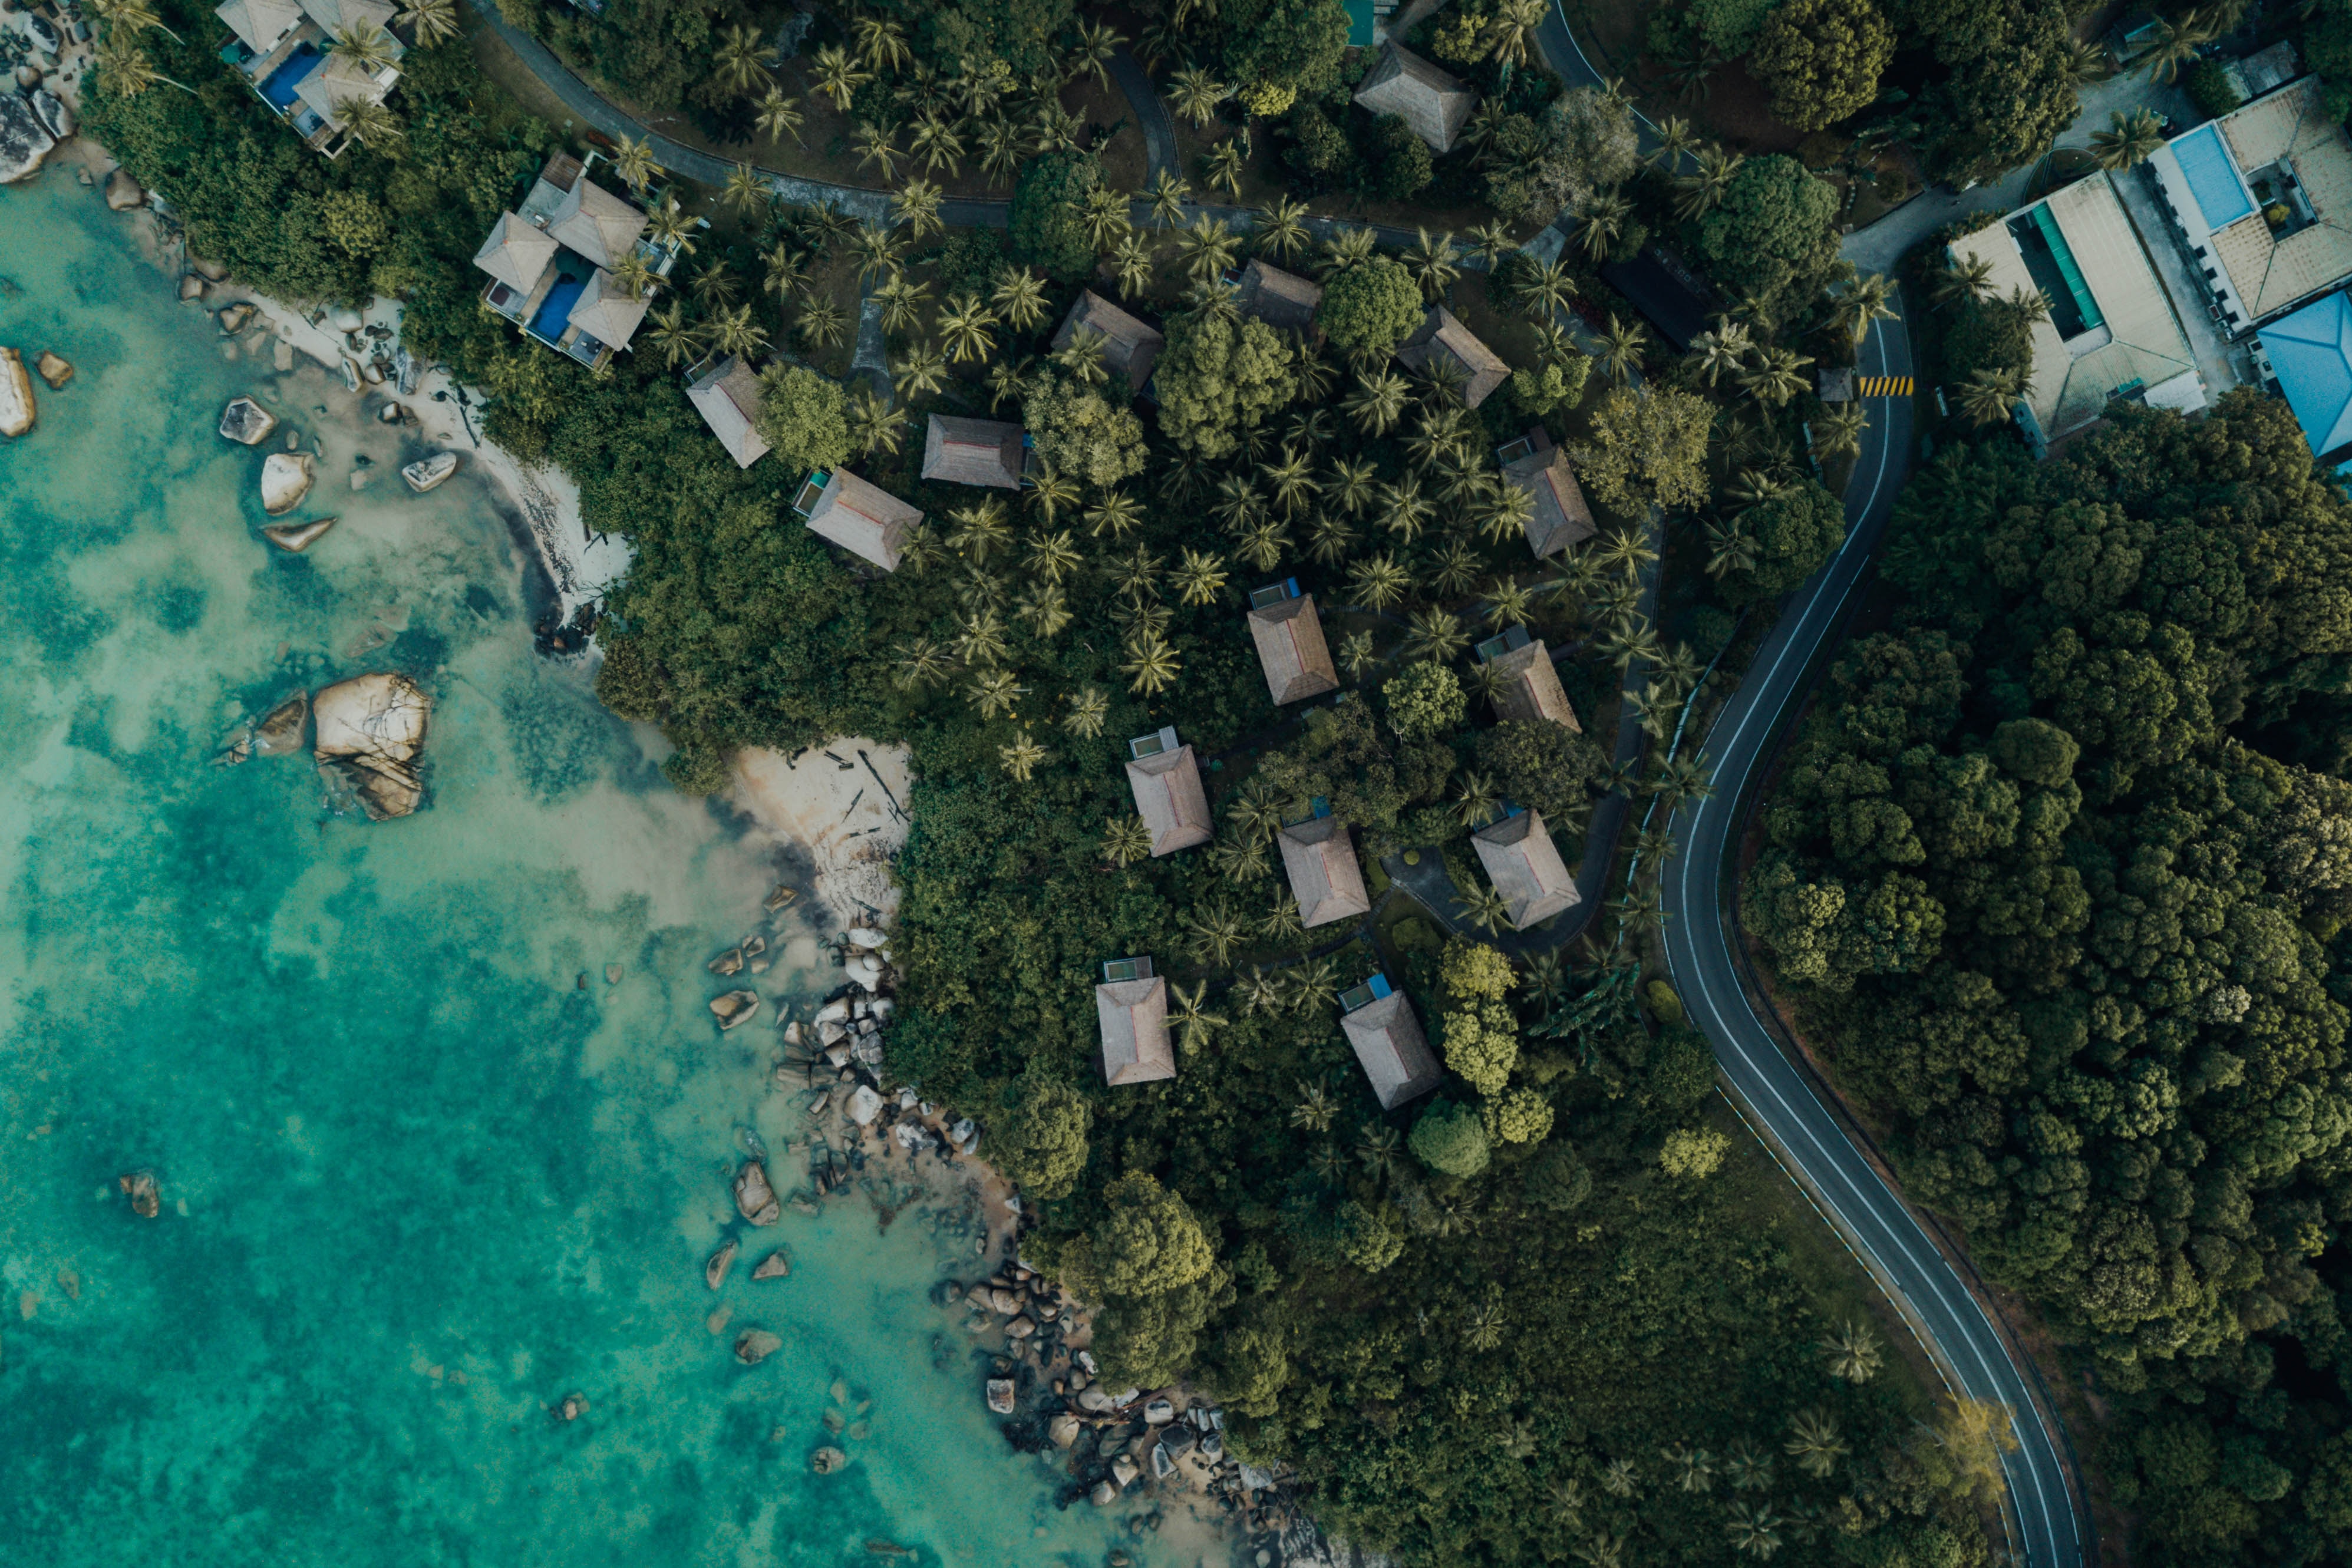 view from above, nature, trees, sea, building, shore, bank Phone Background